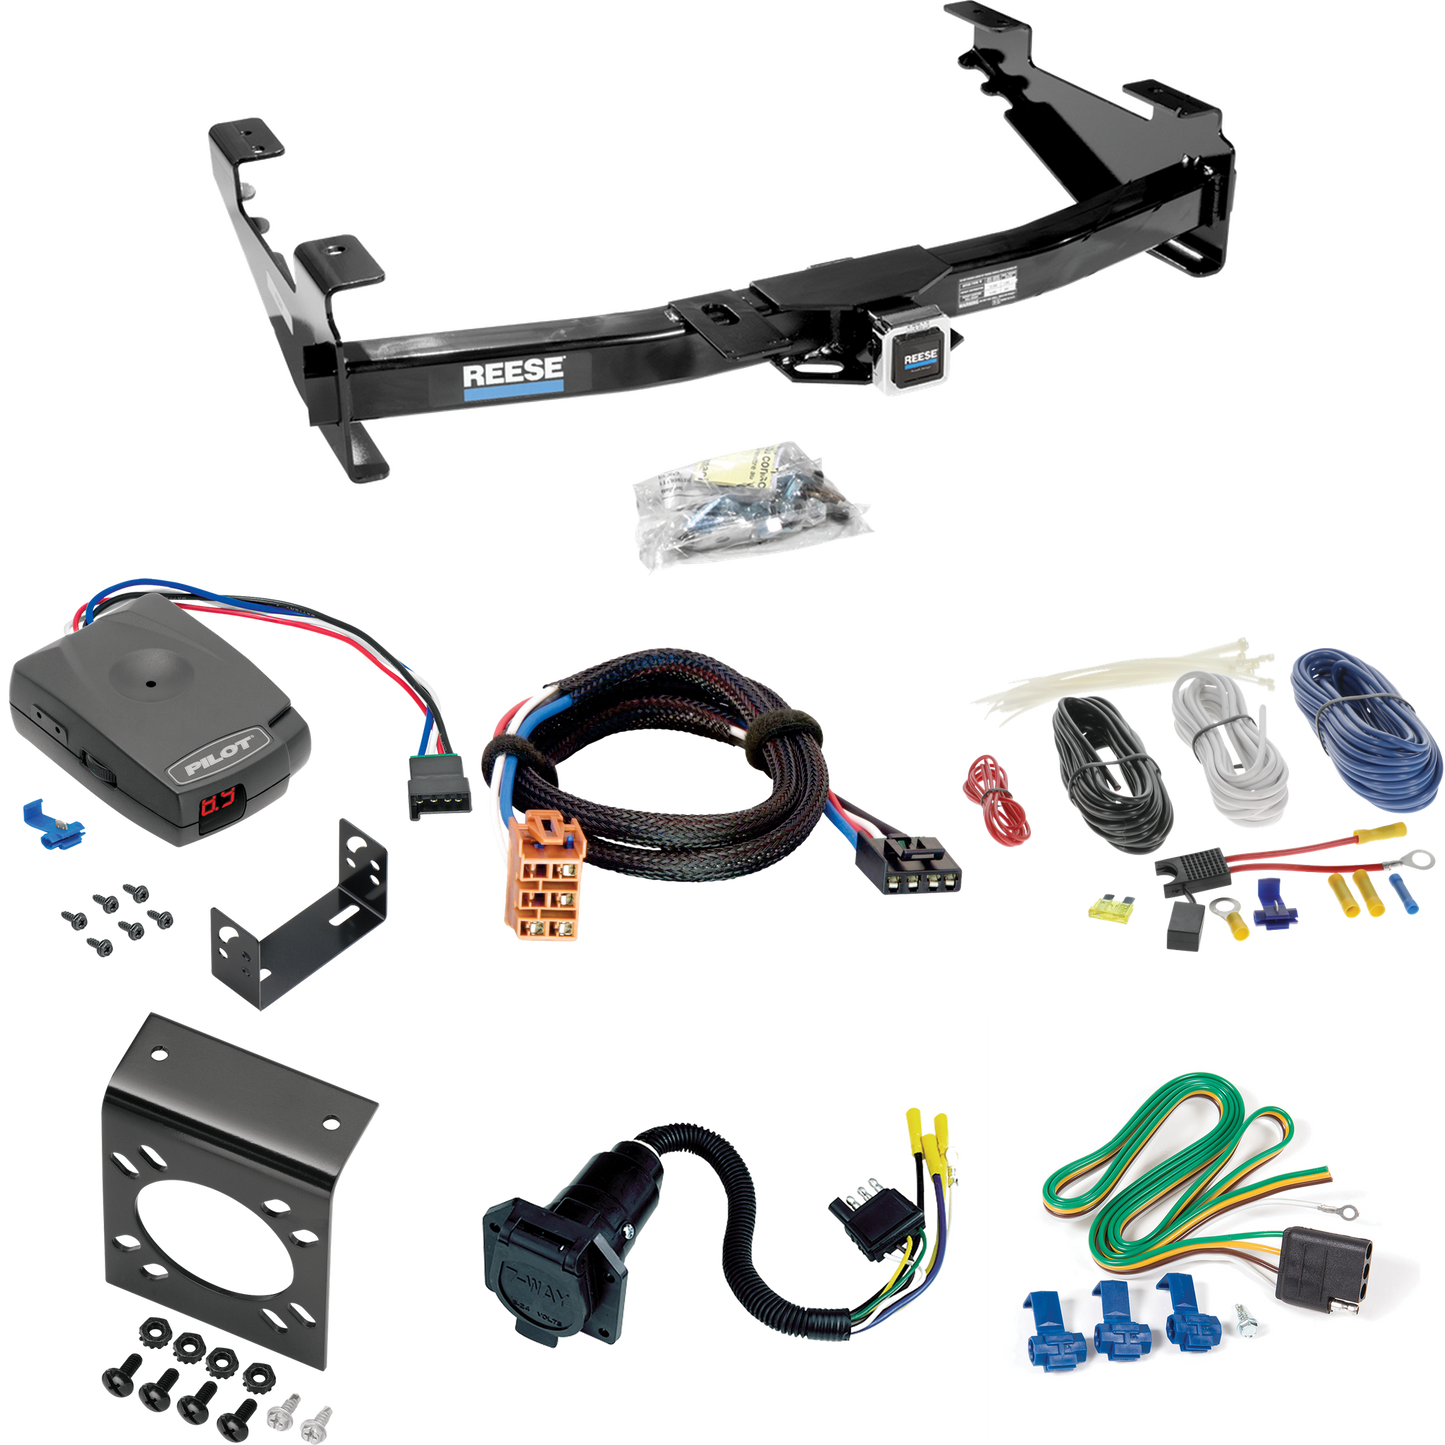 Fits 2003-2007 GMC Sierra 3500 Trailer Hitch Tow PKG w/ Pro Series Pilot Brake Control + Plug & Play BC Adapter + 7-Way RV Wiring (For (Classic) Models) By Reese Towpower